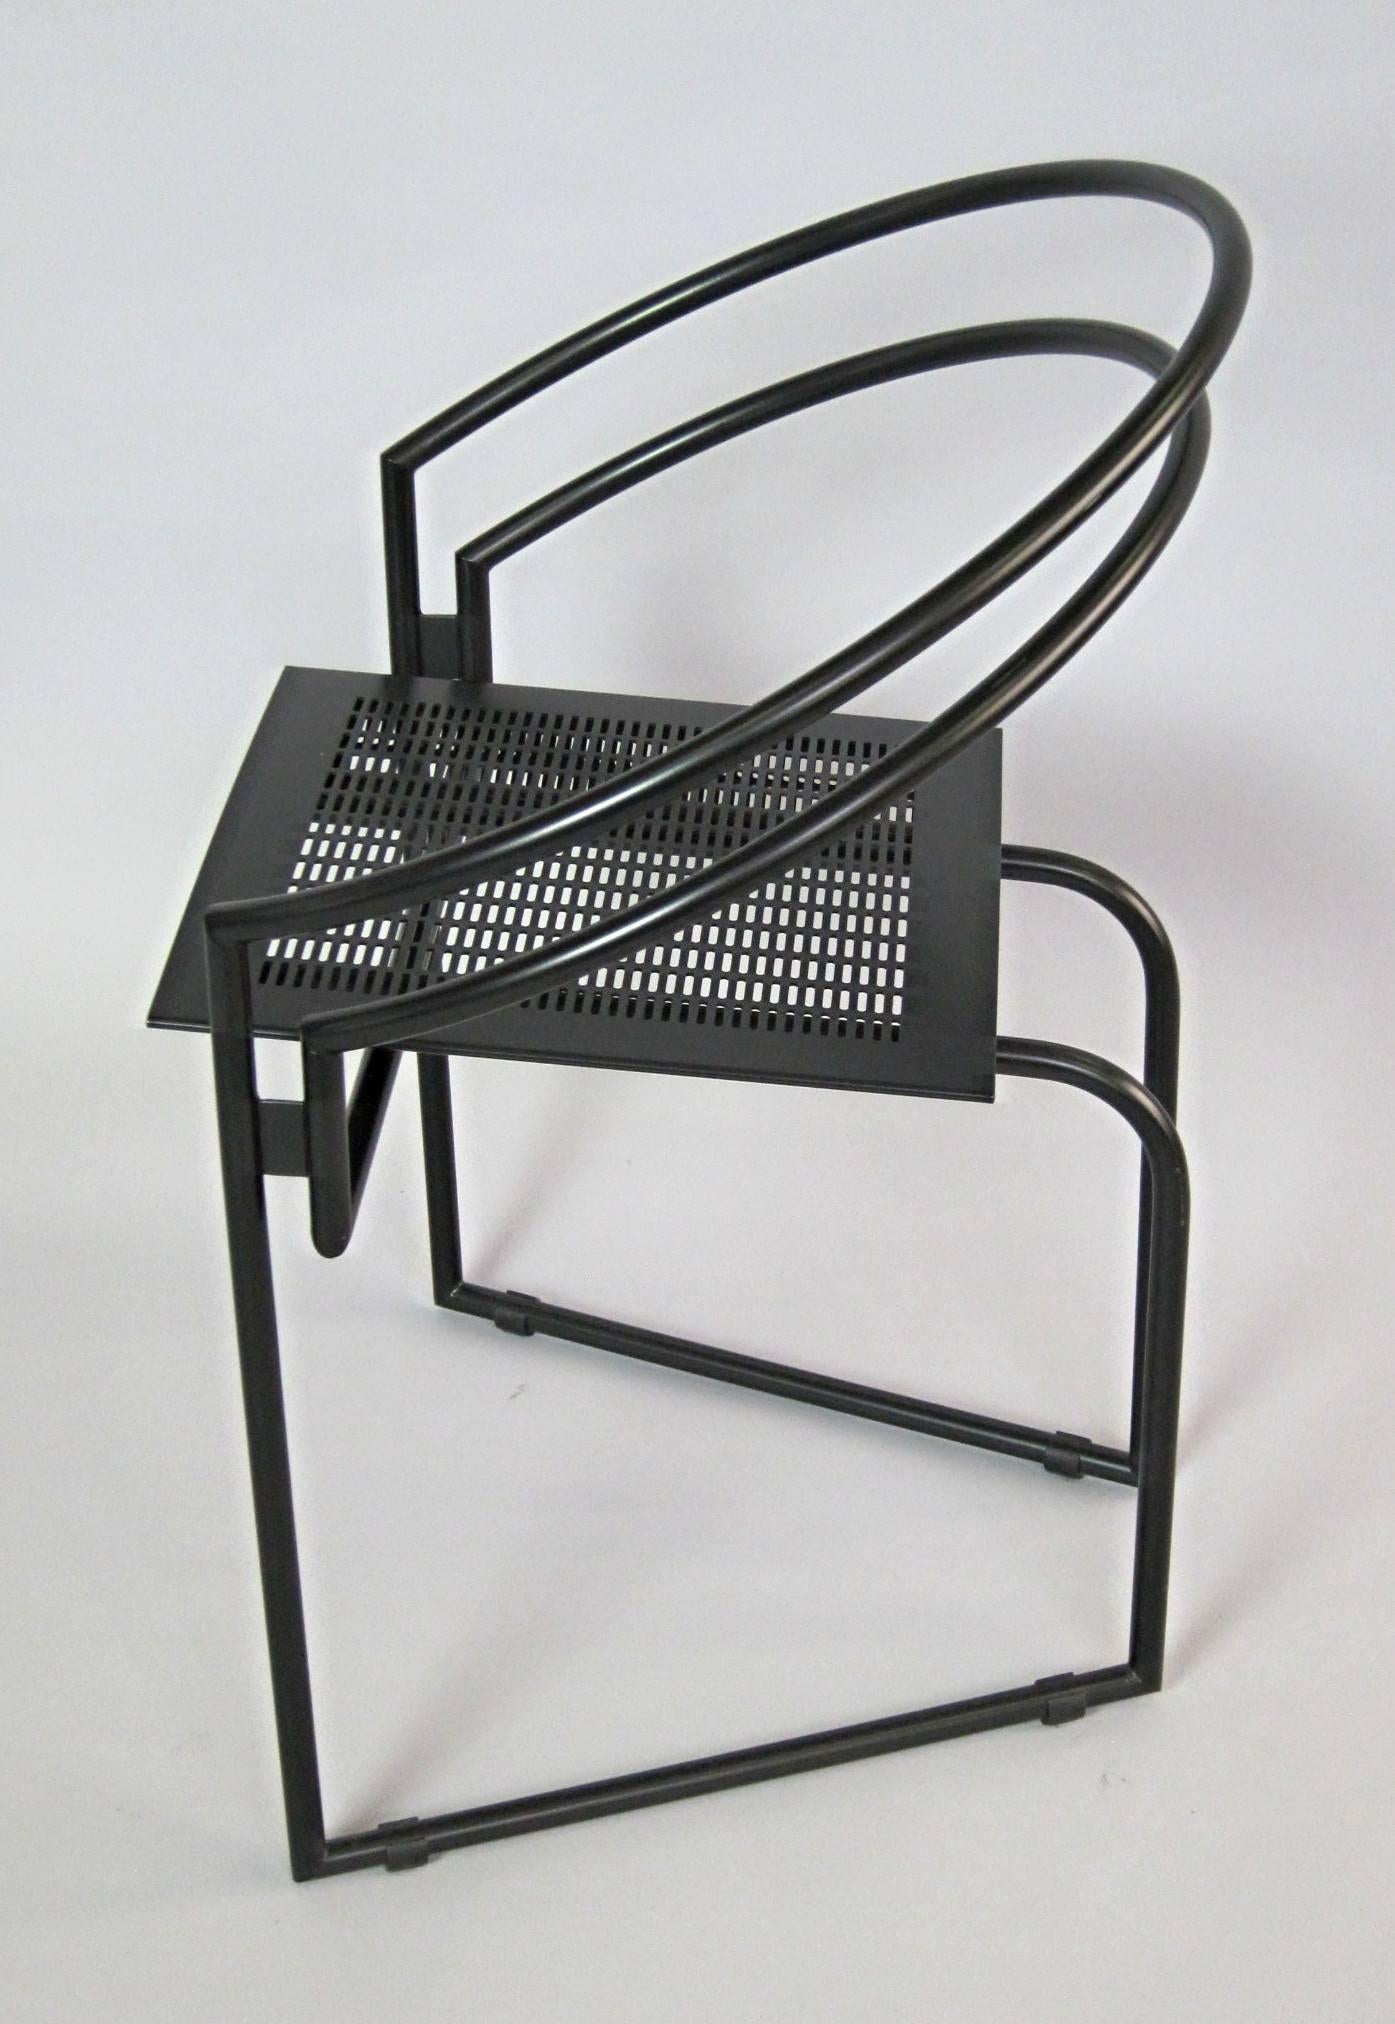 Design by Mario Botta, produced by Alias, Italy in the late 1980s, black lacquered metal.